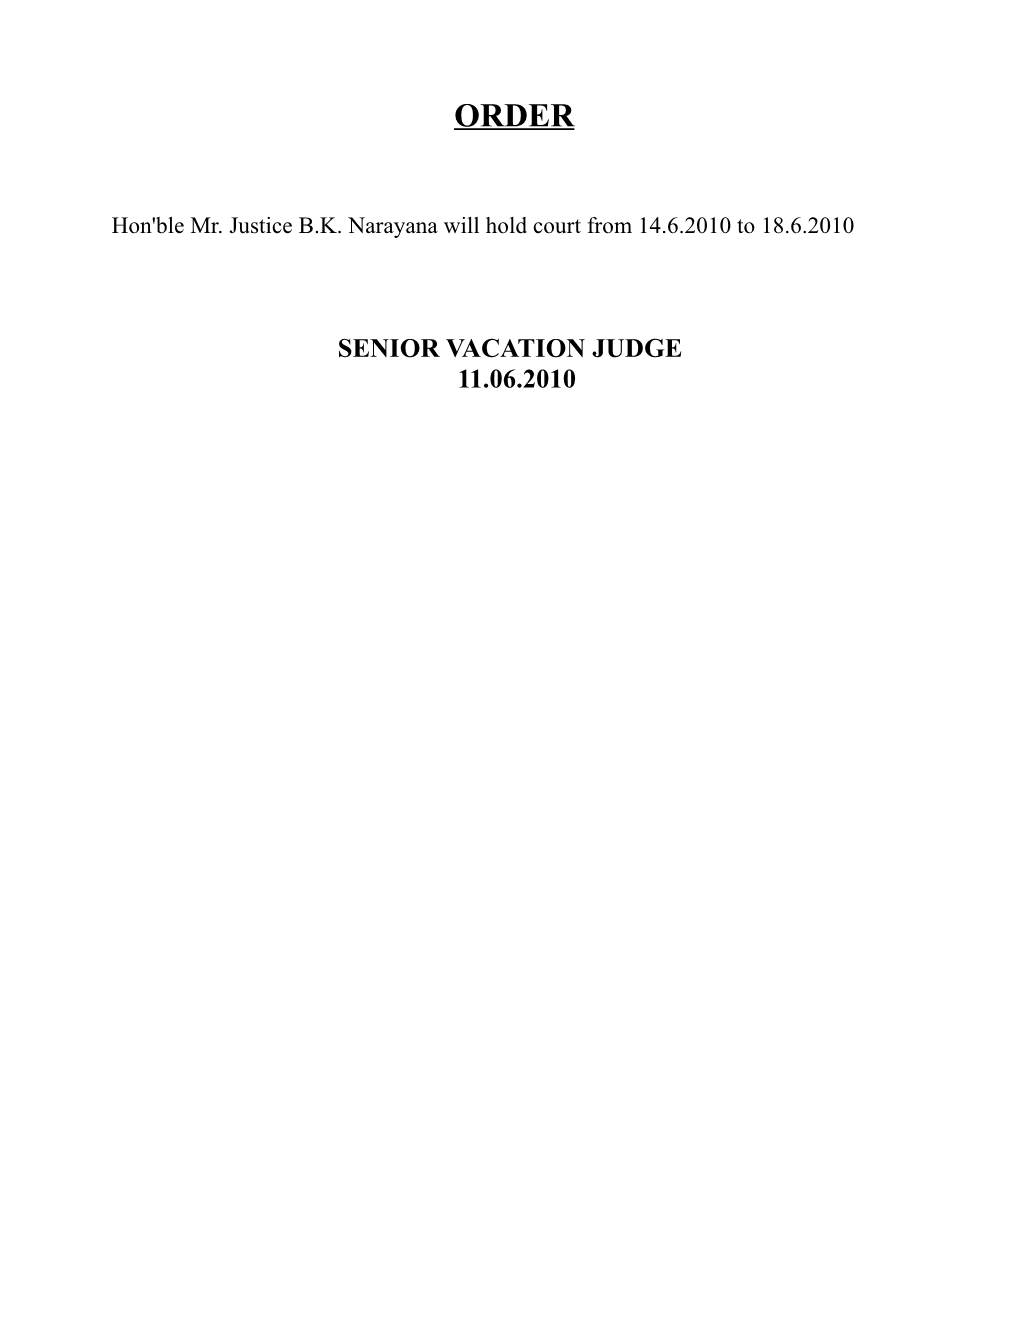 Hon'ble Mr. Justice B.K. Narayana Will Hold Court from 14.6.2010 to 18.6.2010